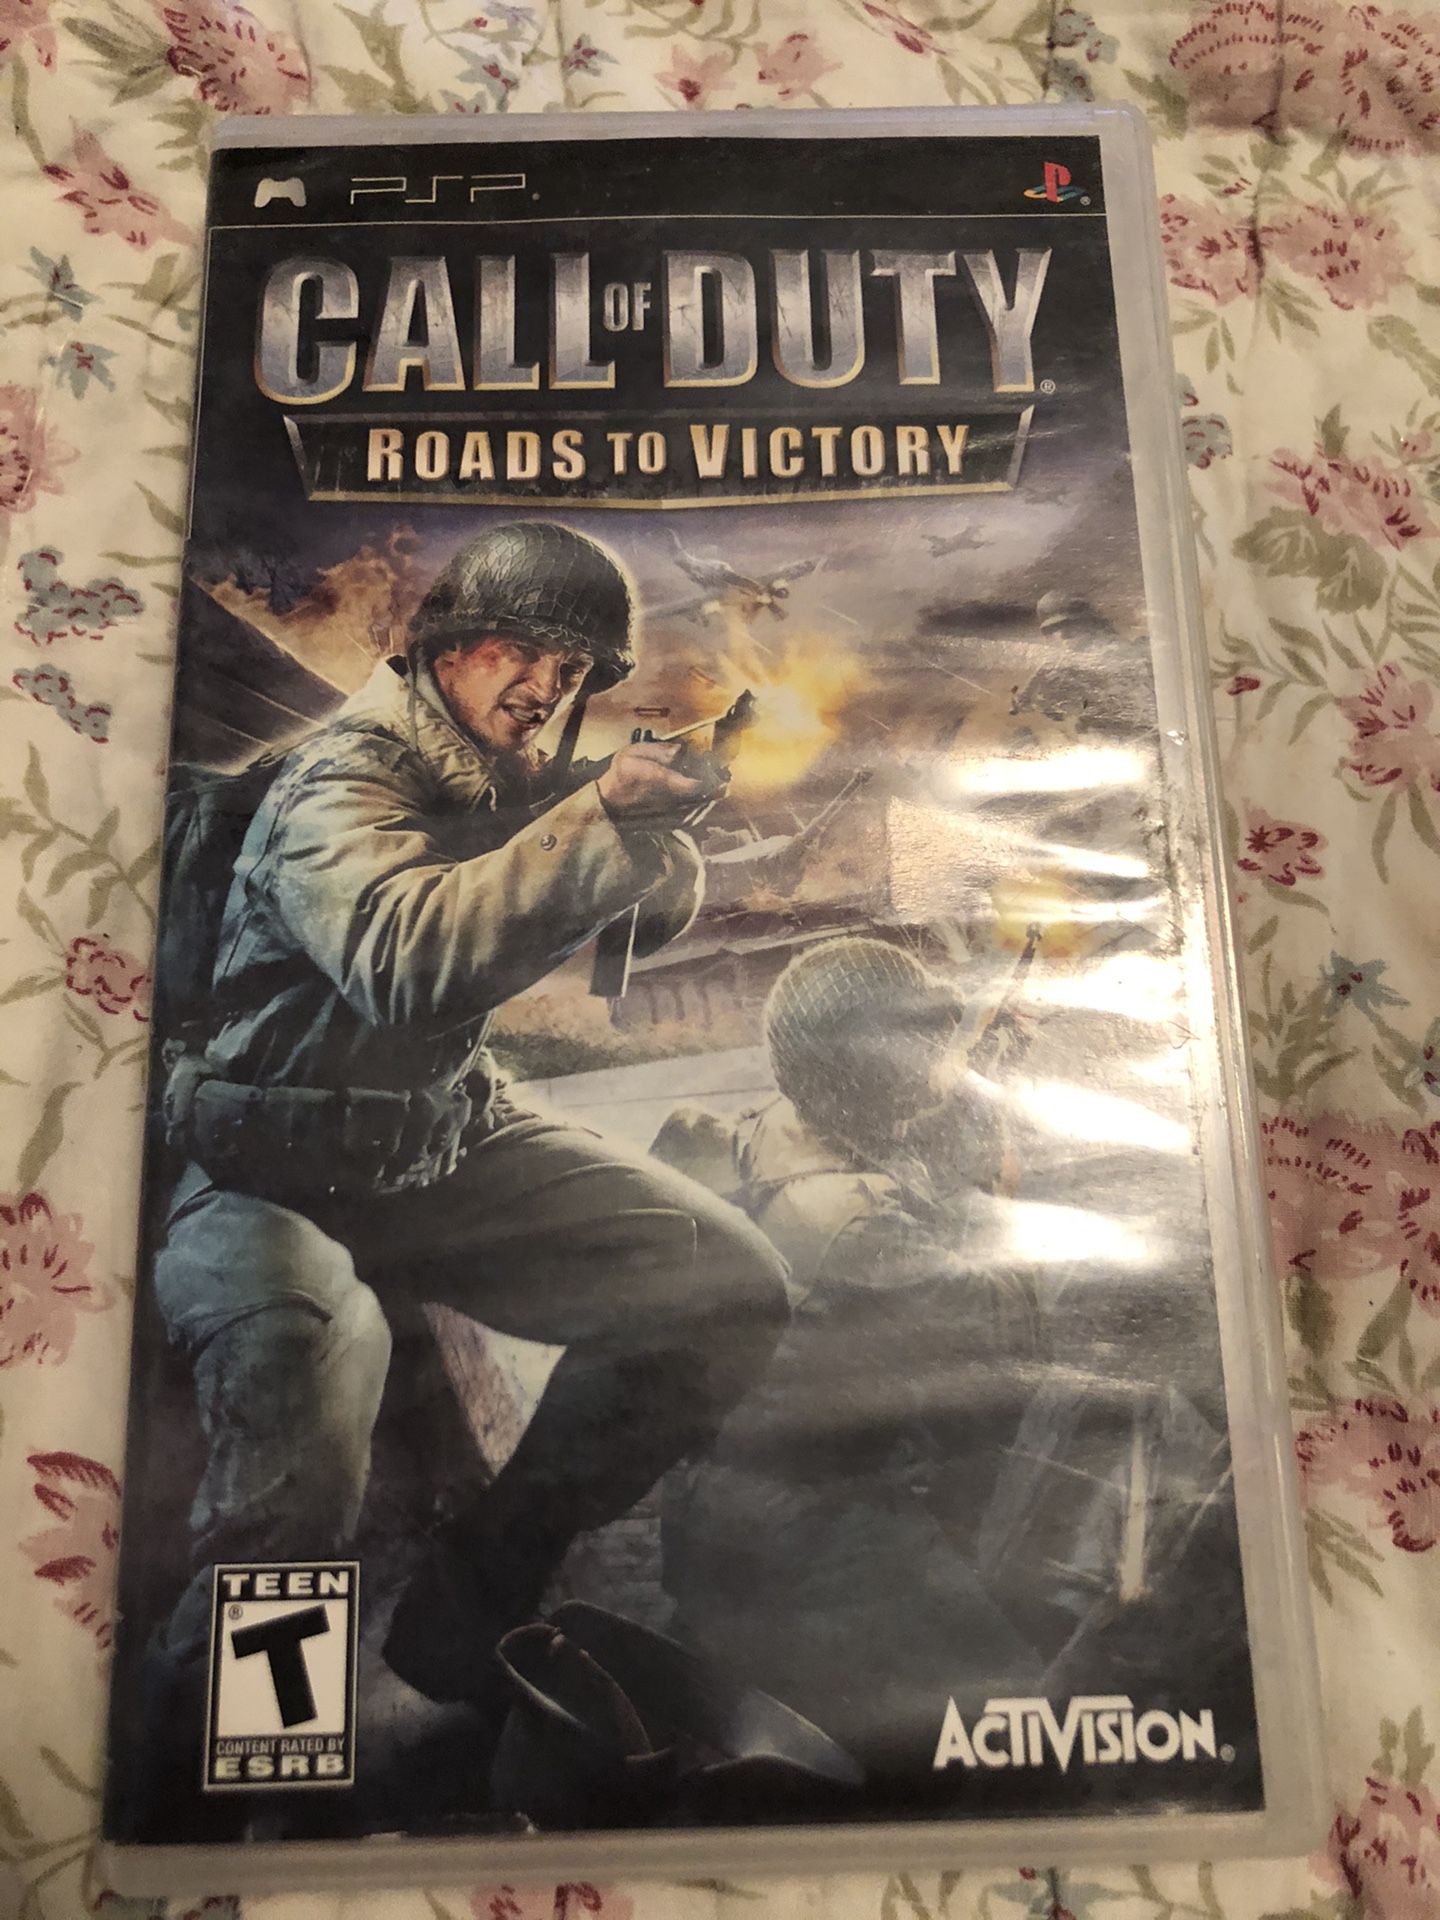 PSP call of duty roads to victory game